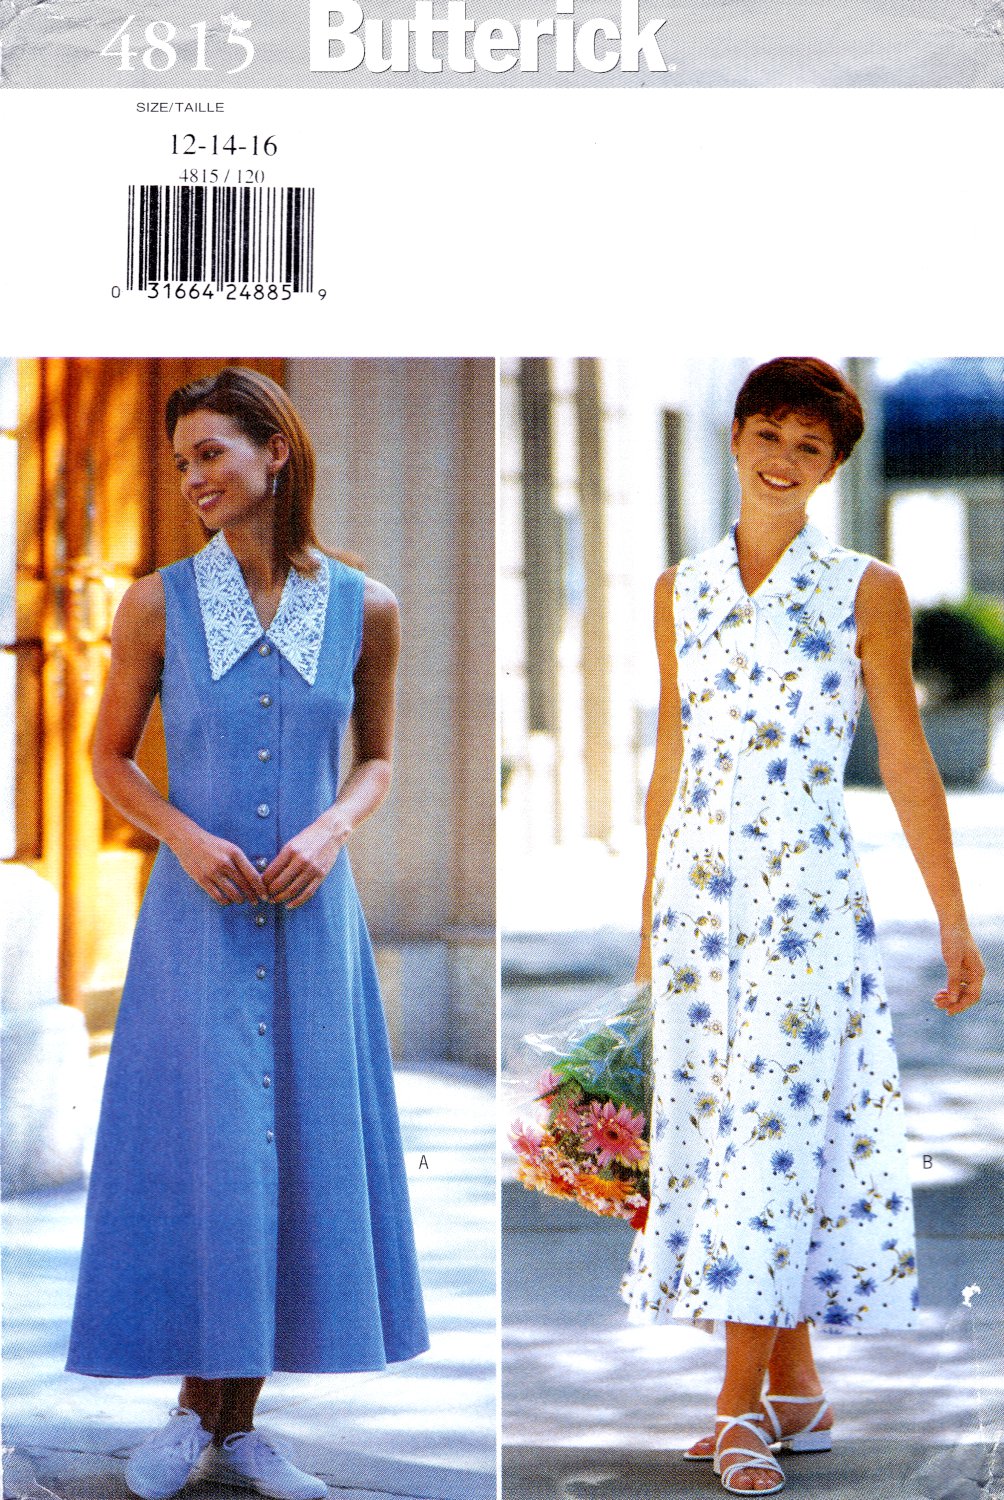 Butterick 4815 Misses Sleeveless Dress Fitted Flared Button Front Sewing Pattern Sizes 12-14-16